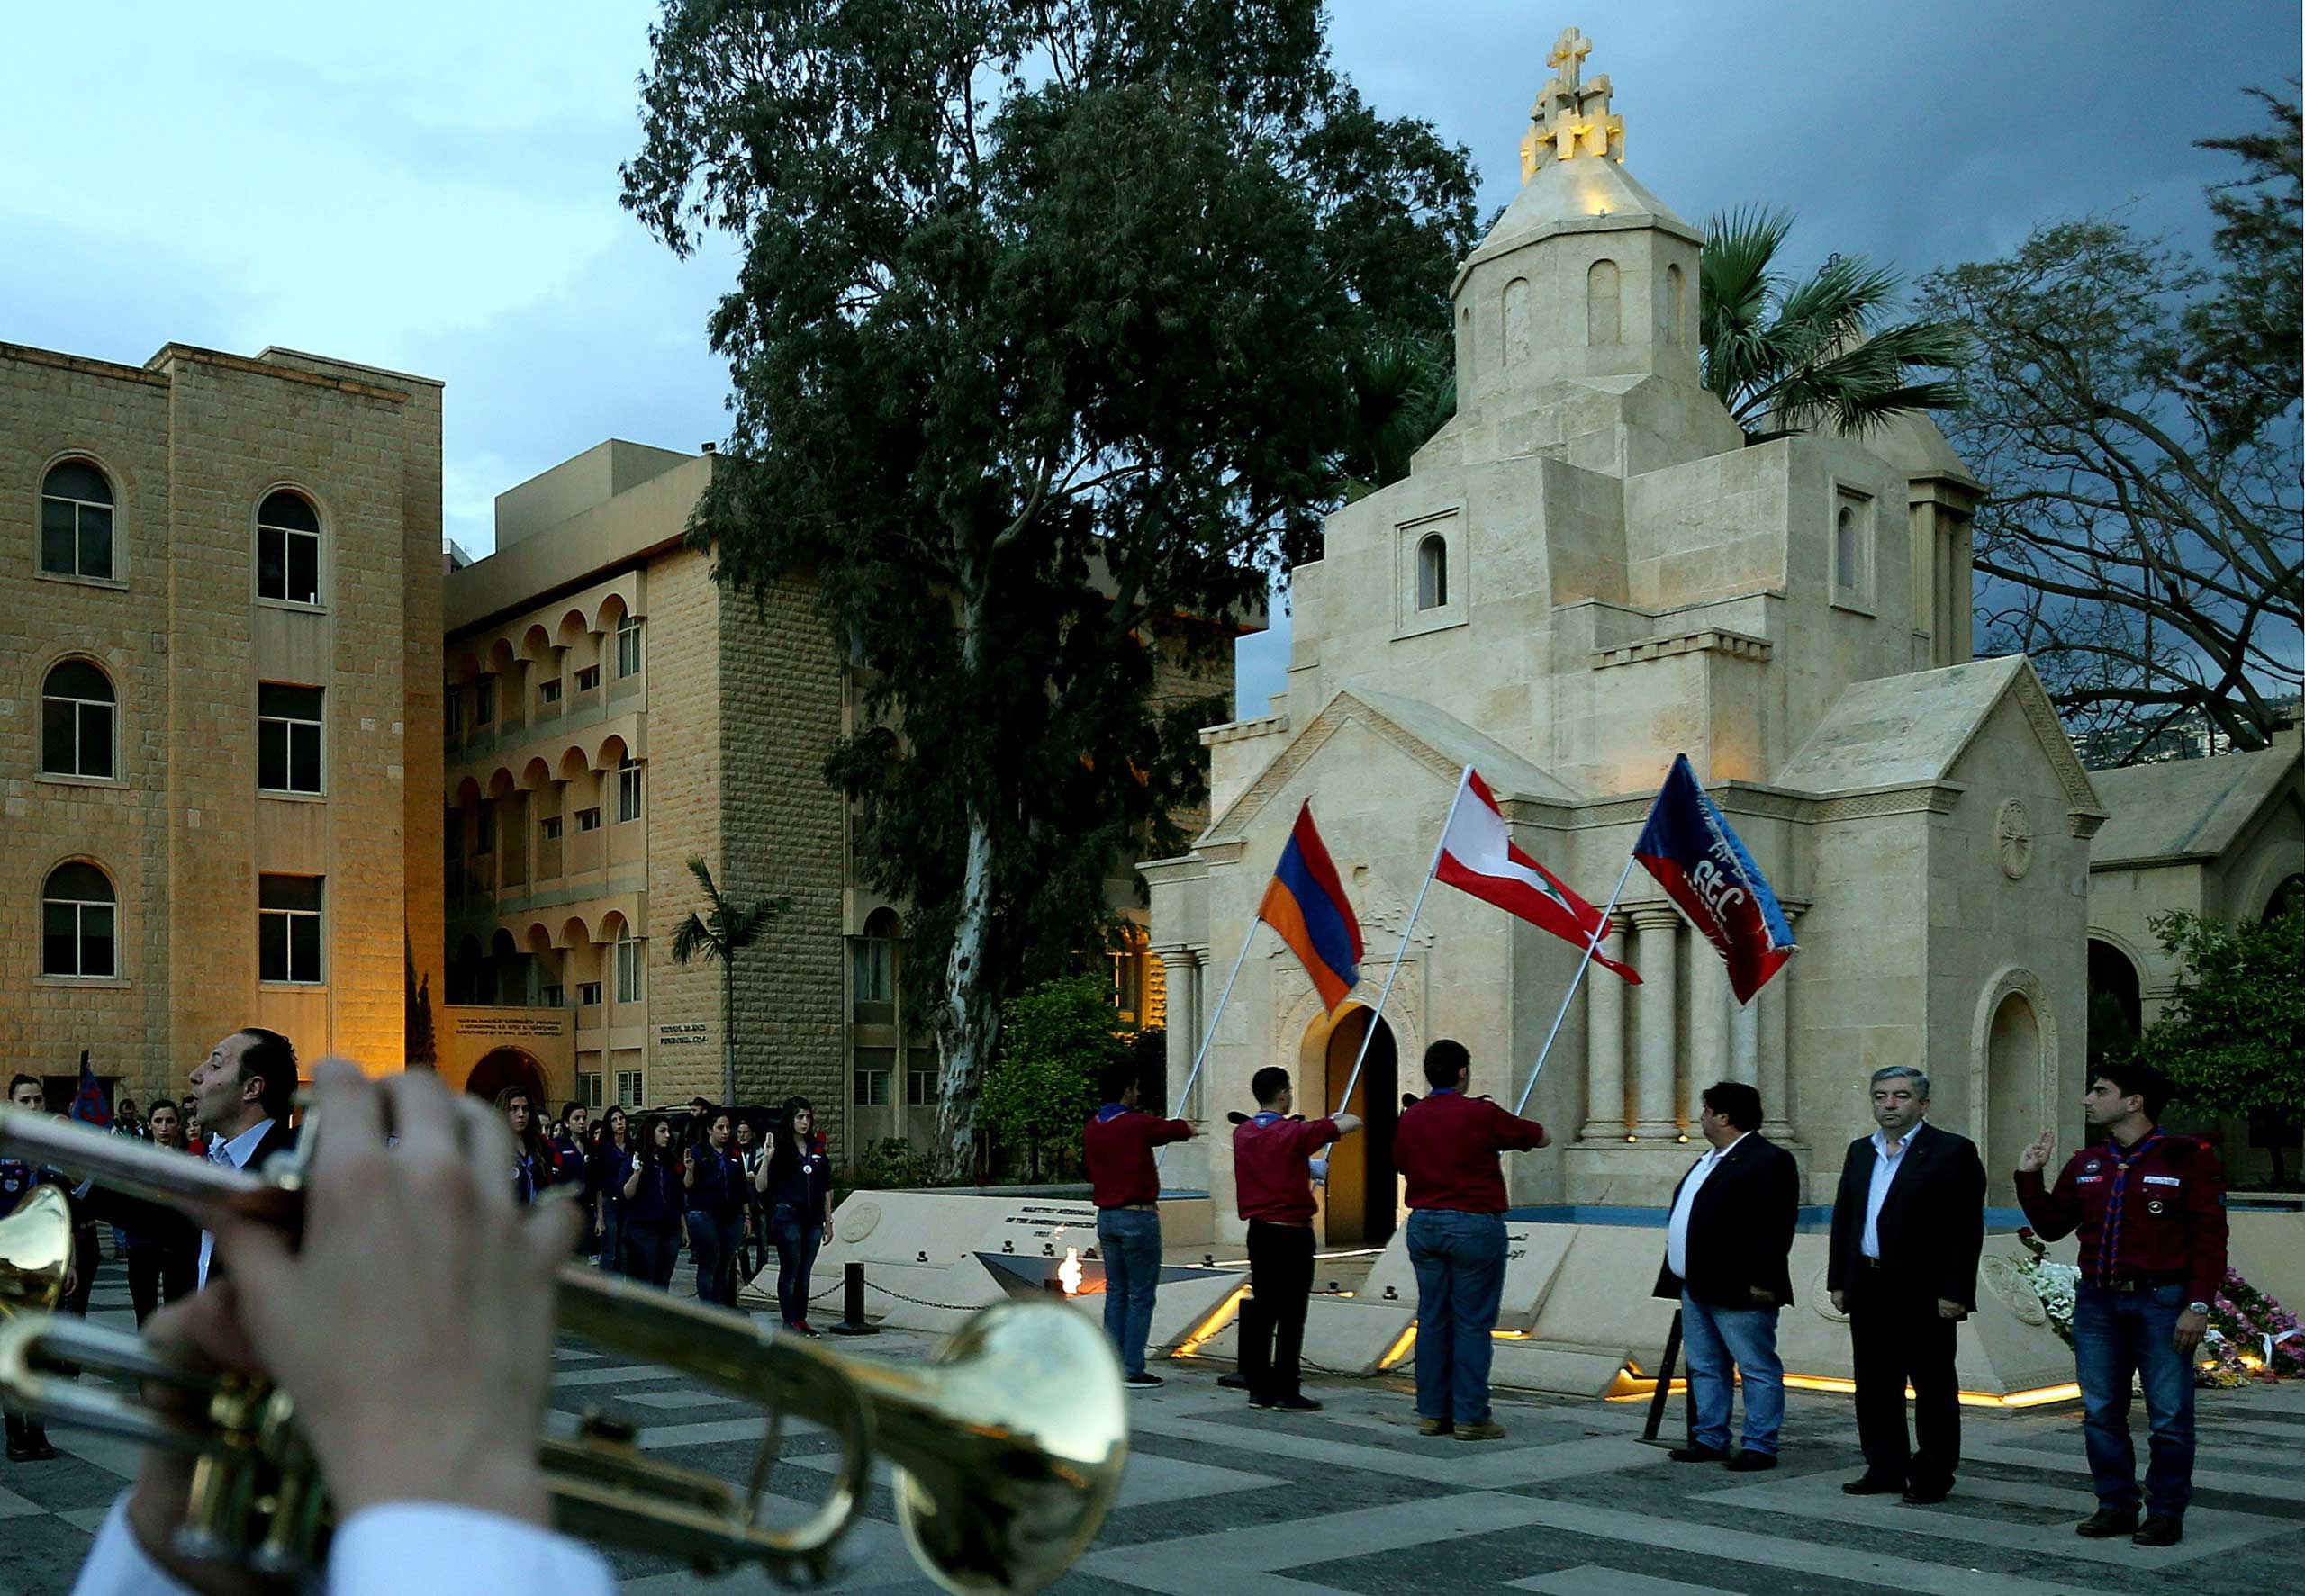 A ceremony at the Armenian Martyrs memorial, north of Beirut on April 23, 2015. (Joseph Eid—AFP/Getty Images)